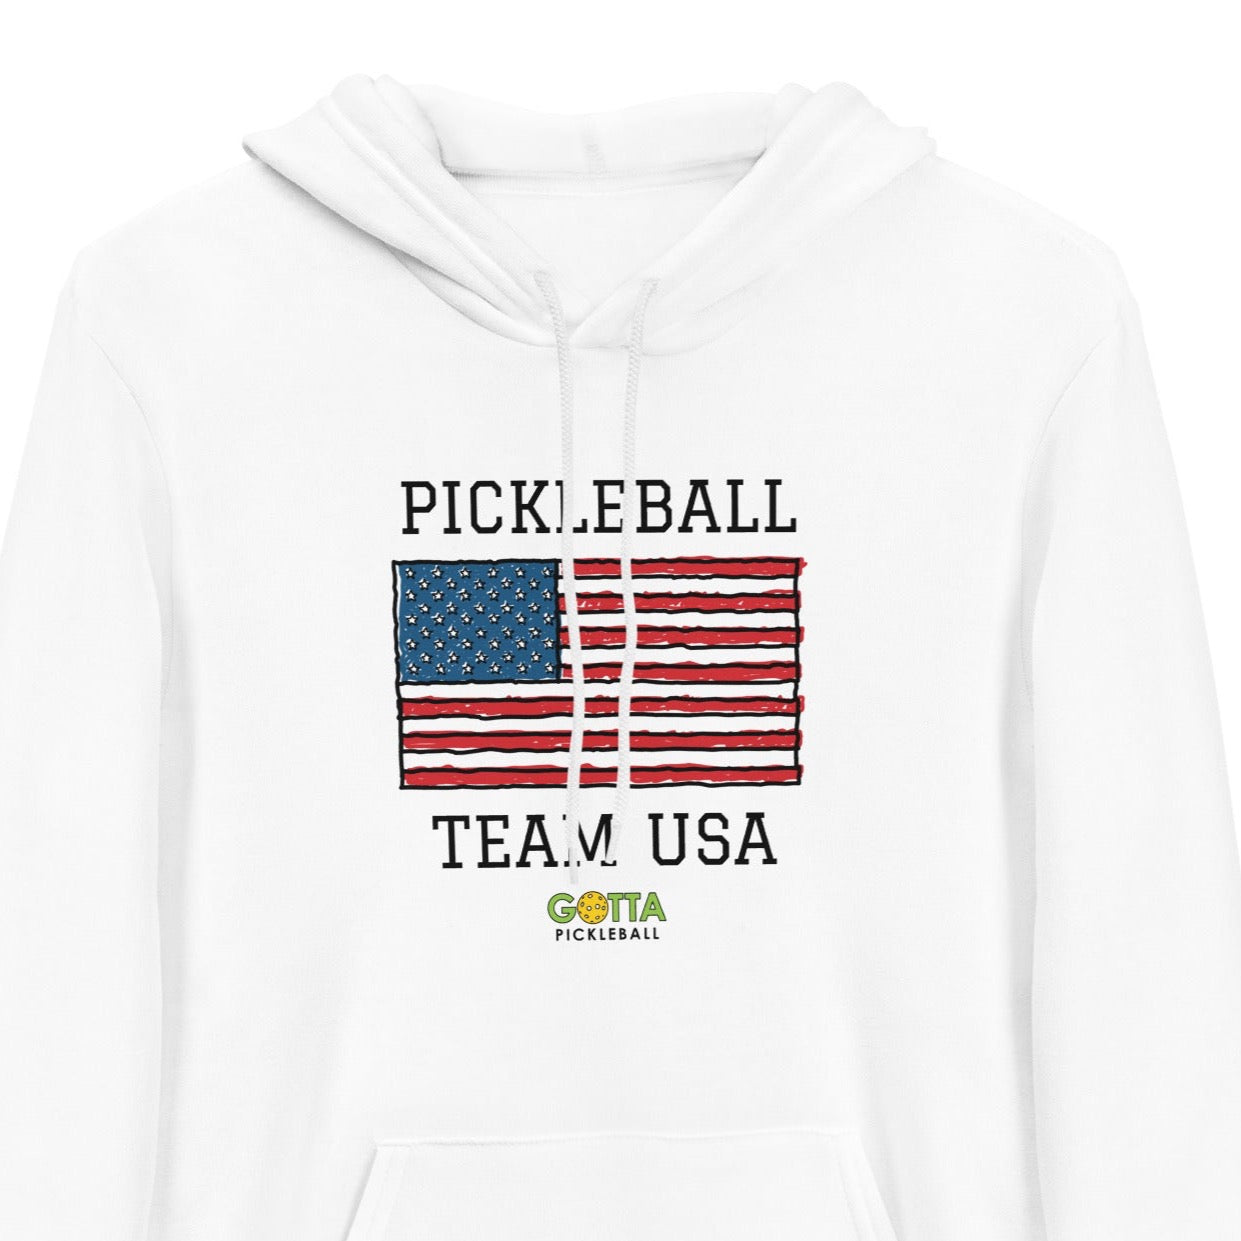 Gotta Pickleball white soft fleece lightweight hoodie sweatshirt with centered design of American Flag in red white and blue with words pickleball team USA